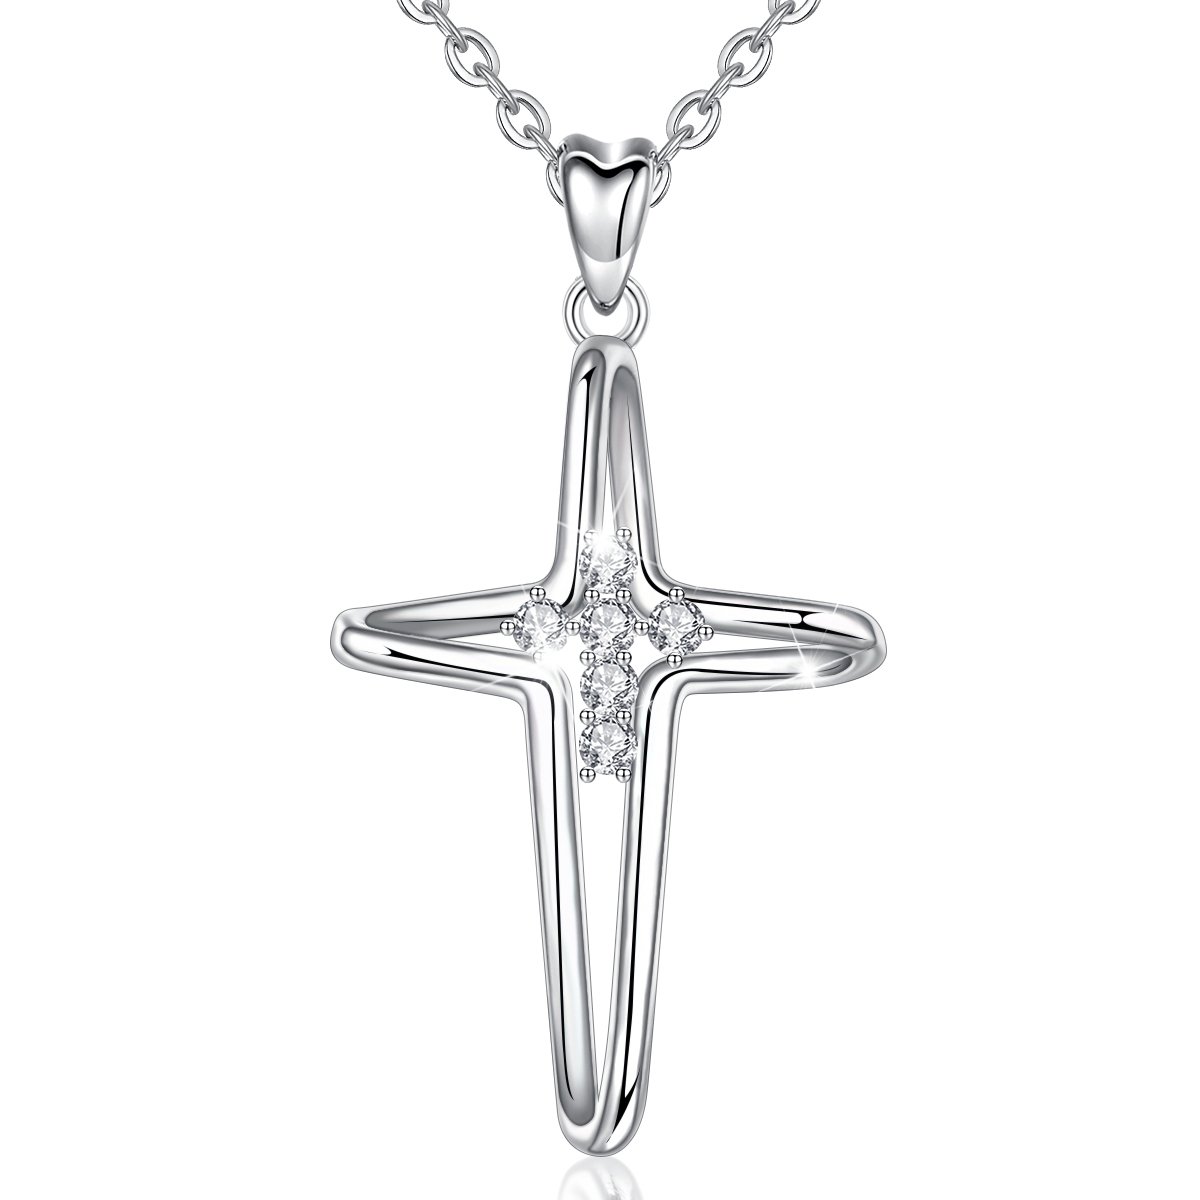 Merryshine Jewelry S925 Sterling Silver Delicate Contracted Cross Pendants Necklaces